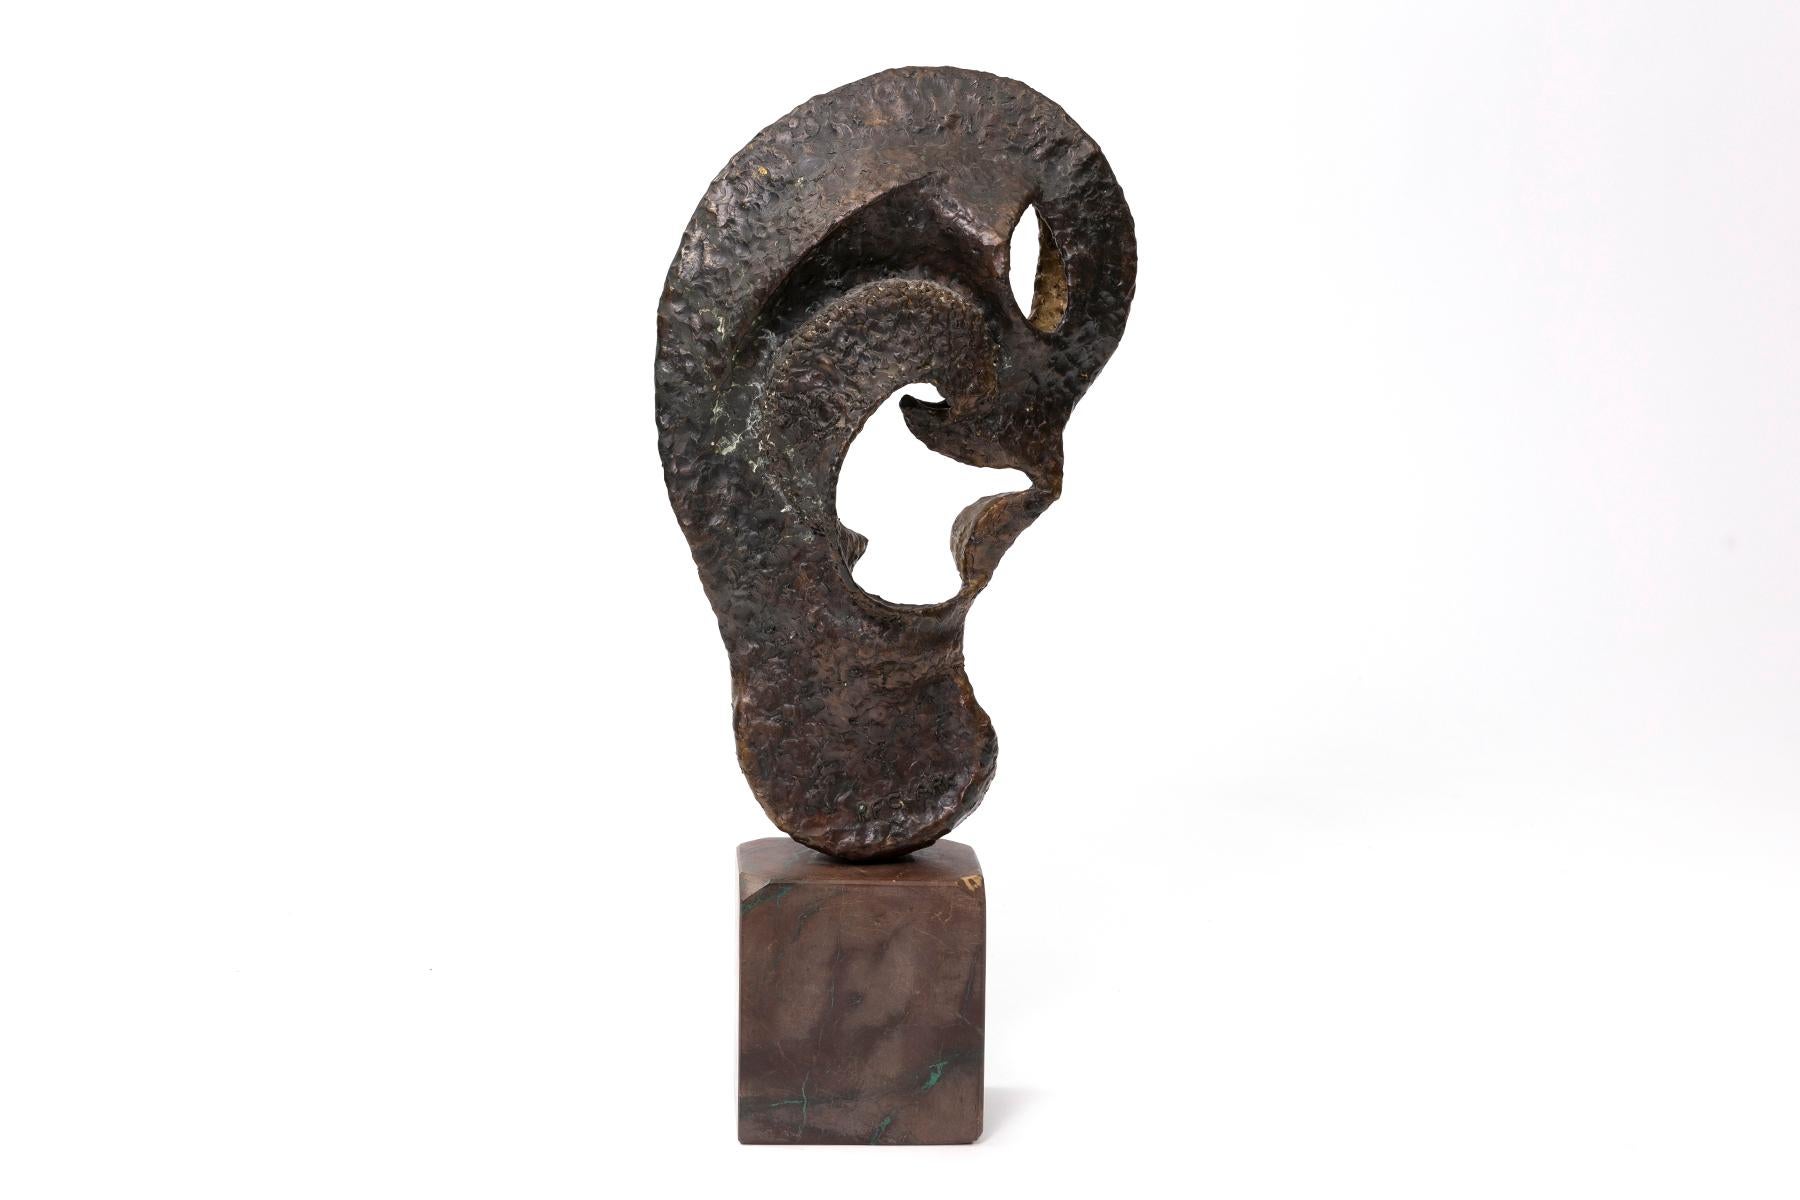 Large Scale pounded bronze ear sculpture mounted on marble by artist Robert Clark, of the duo Clark & (William) De Lillo. 

The costume jeweler and artist, Robert F. Clark, partnered with jeweler William De Lillo, to create their haute couture